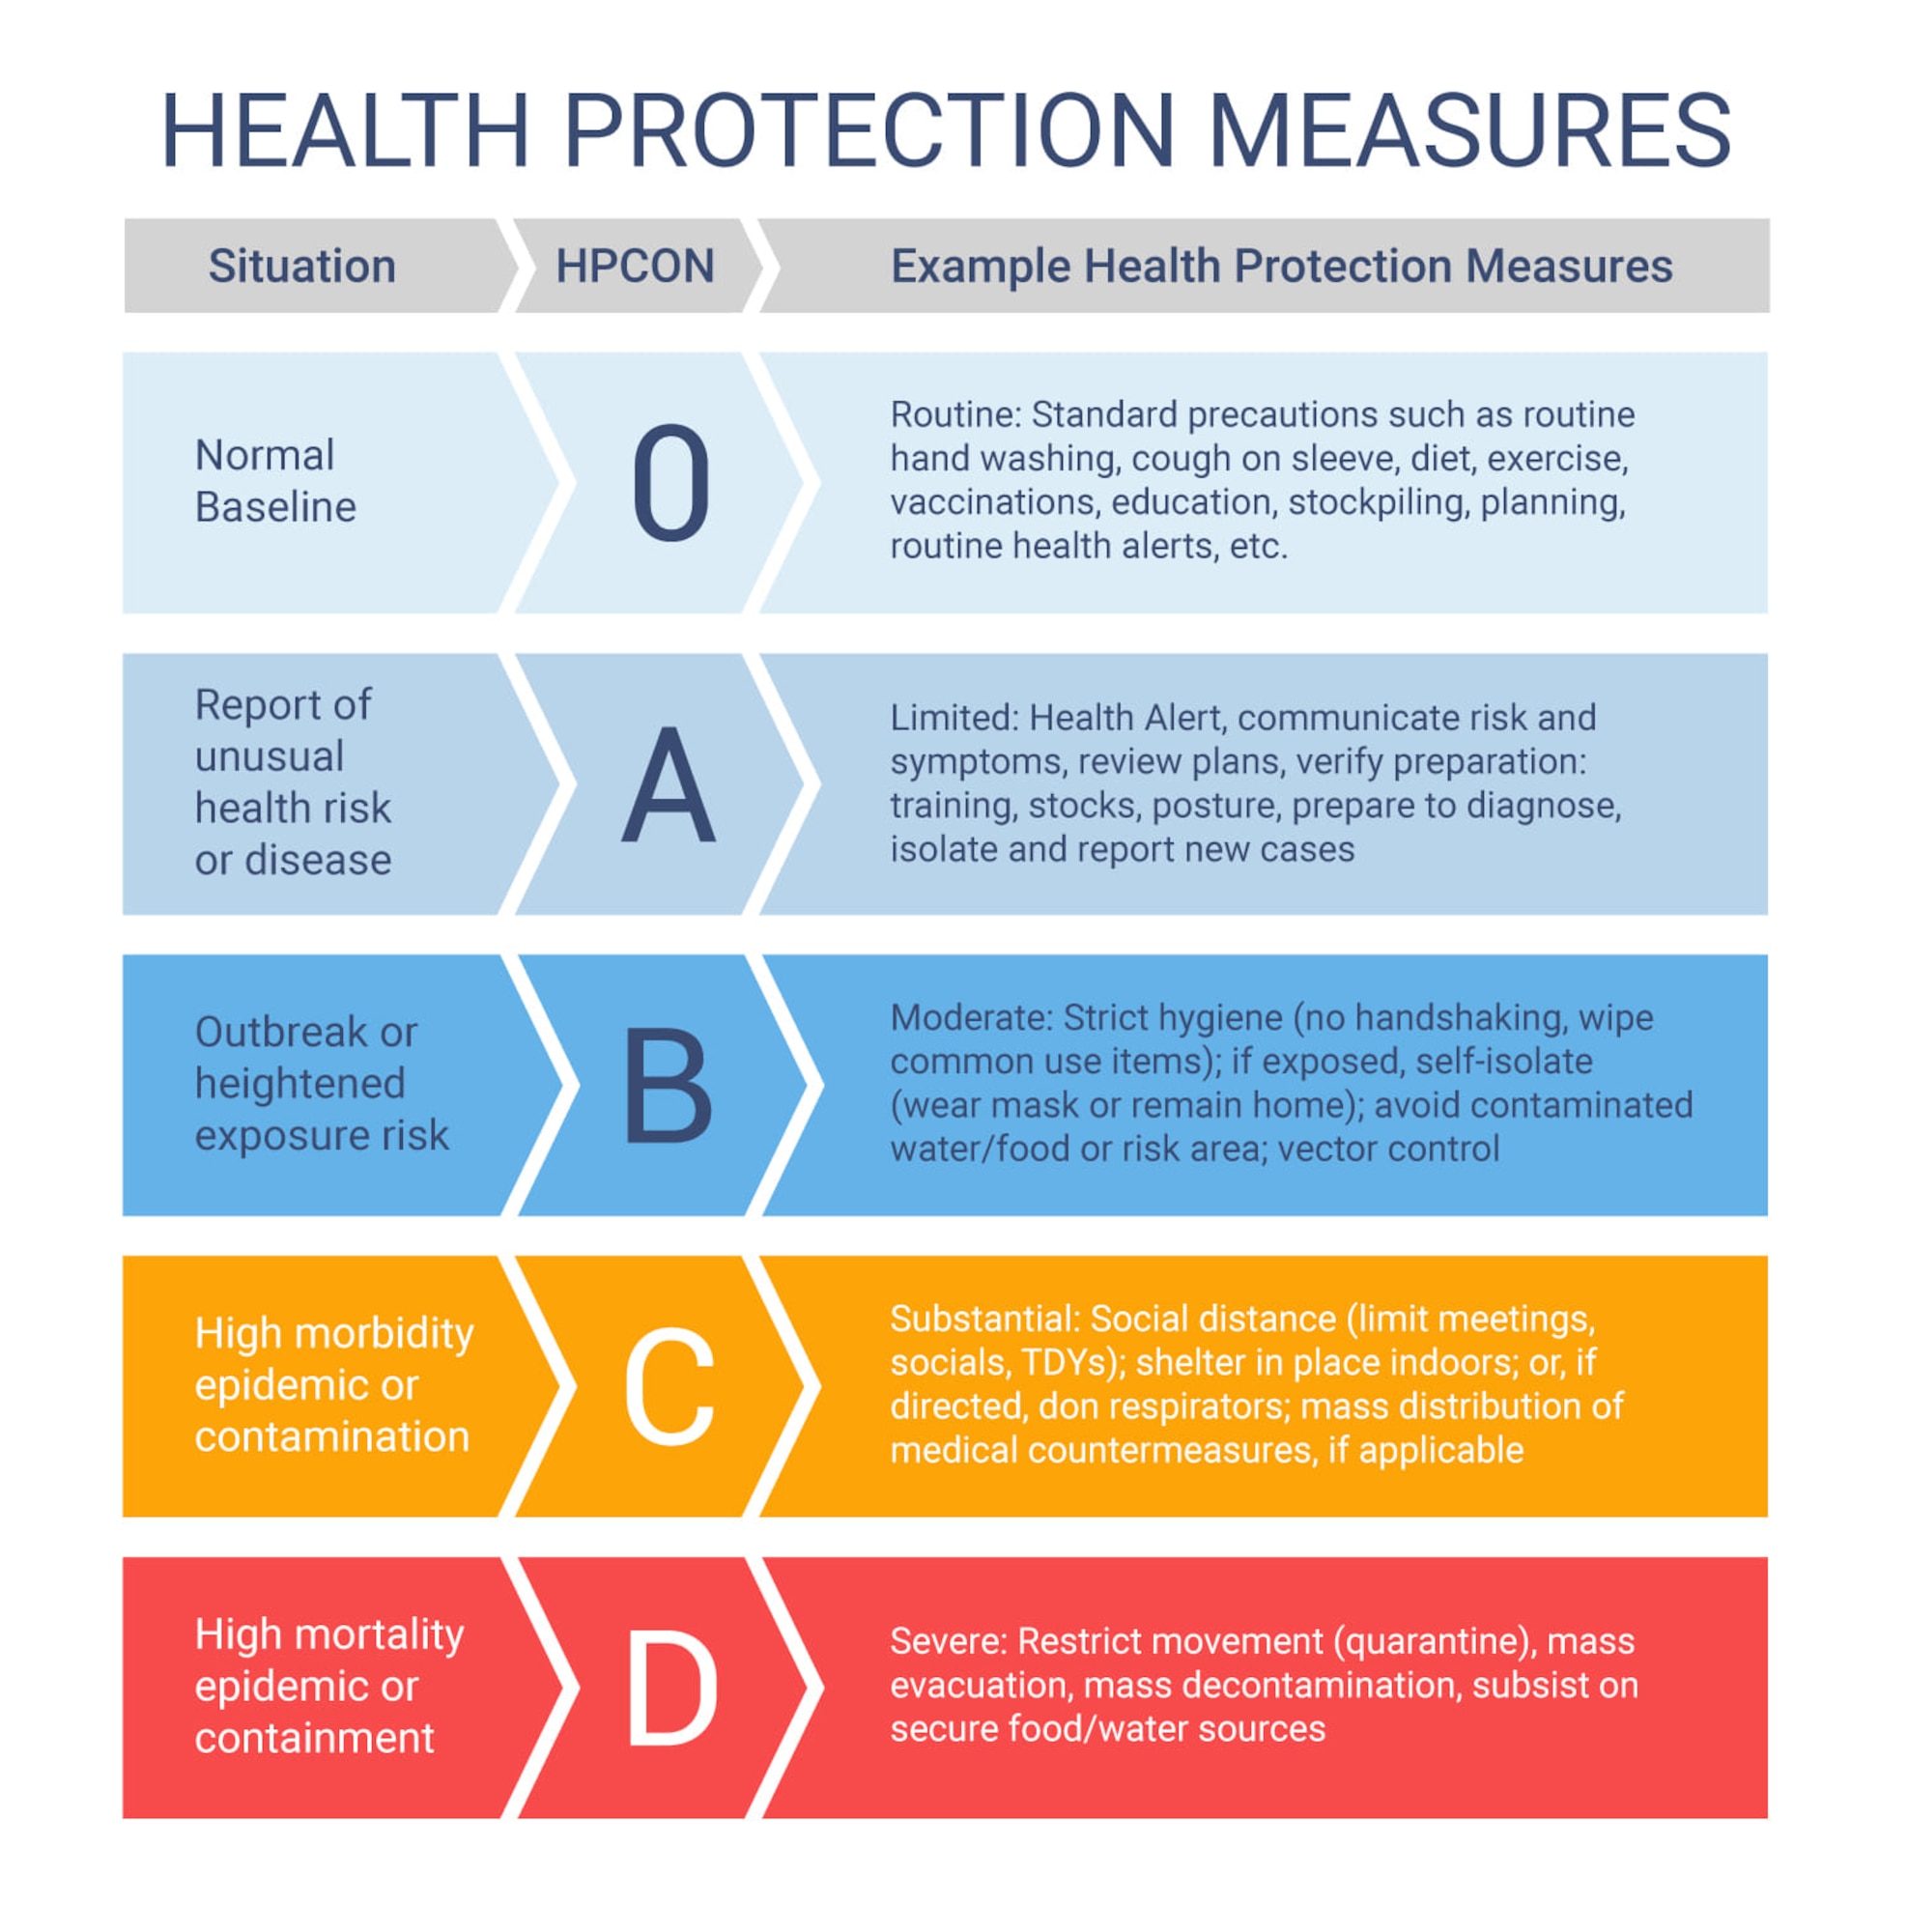 Health Protection Measures explained